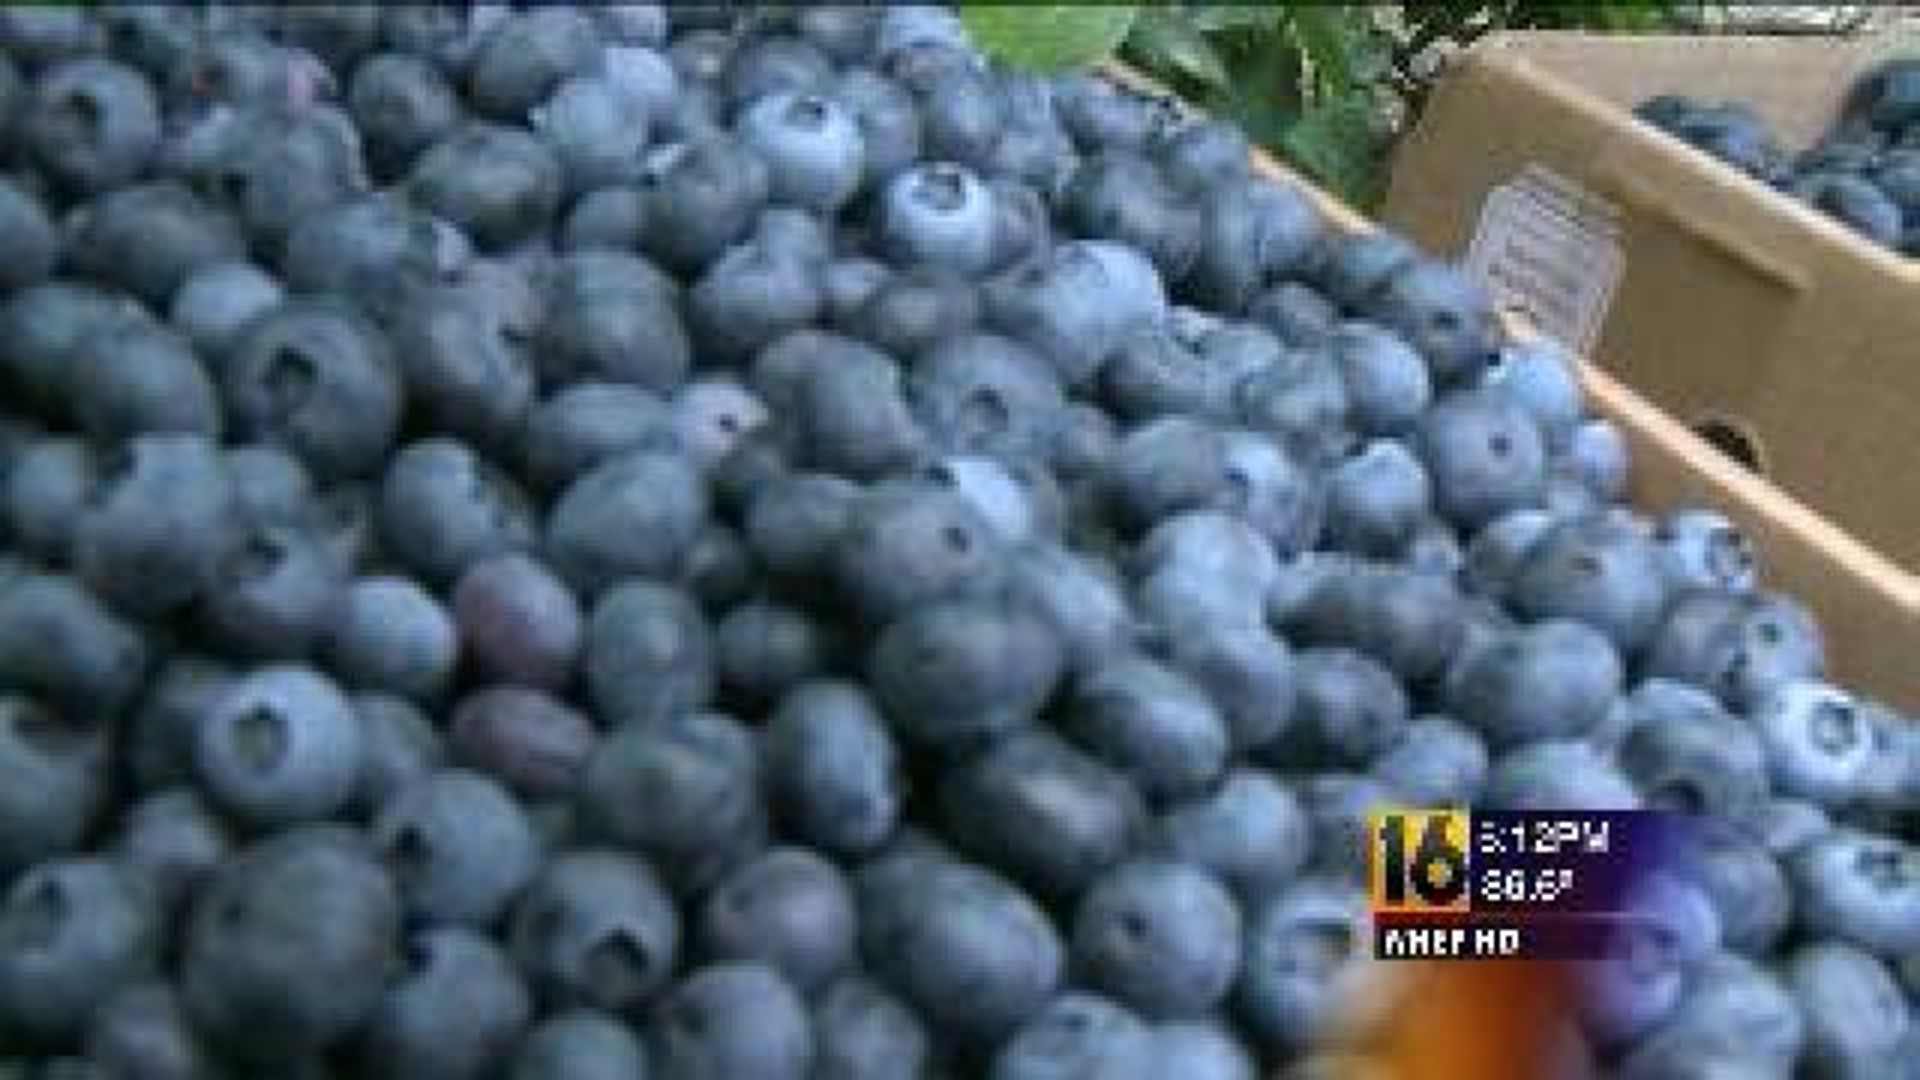 Blueberry Business Booming